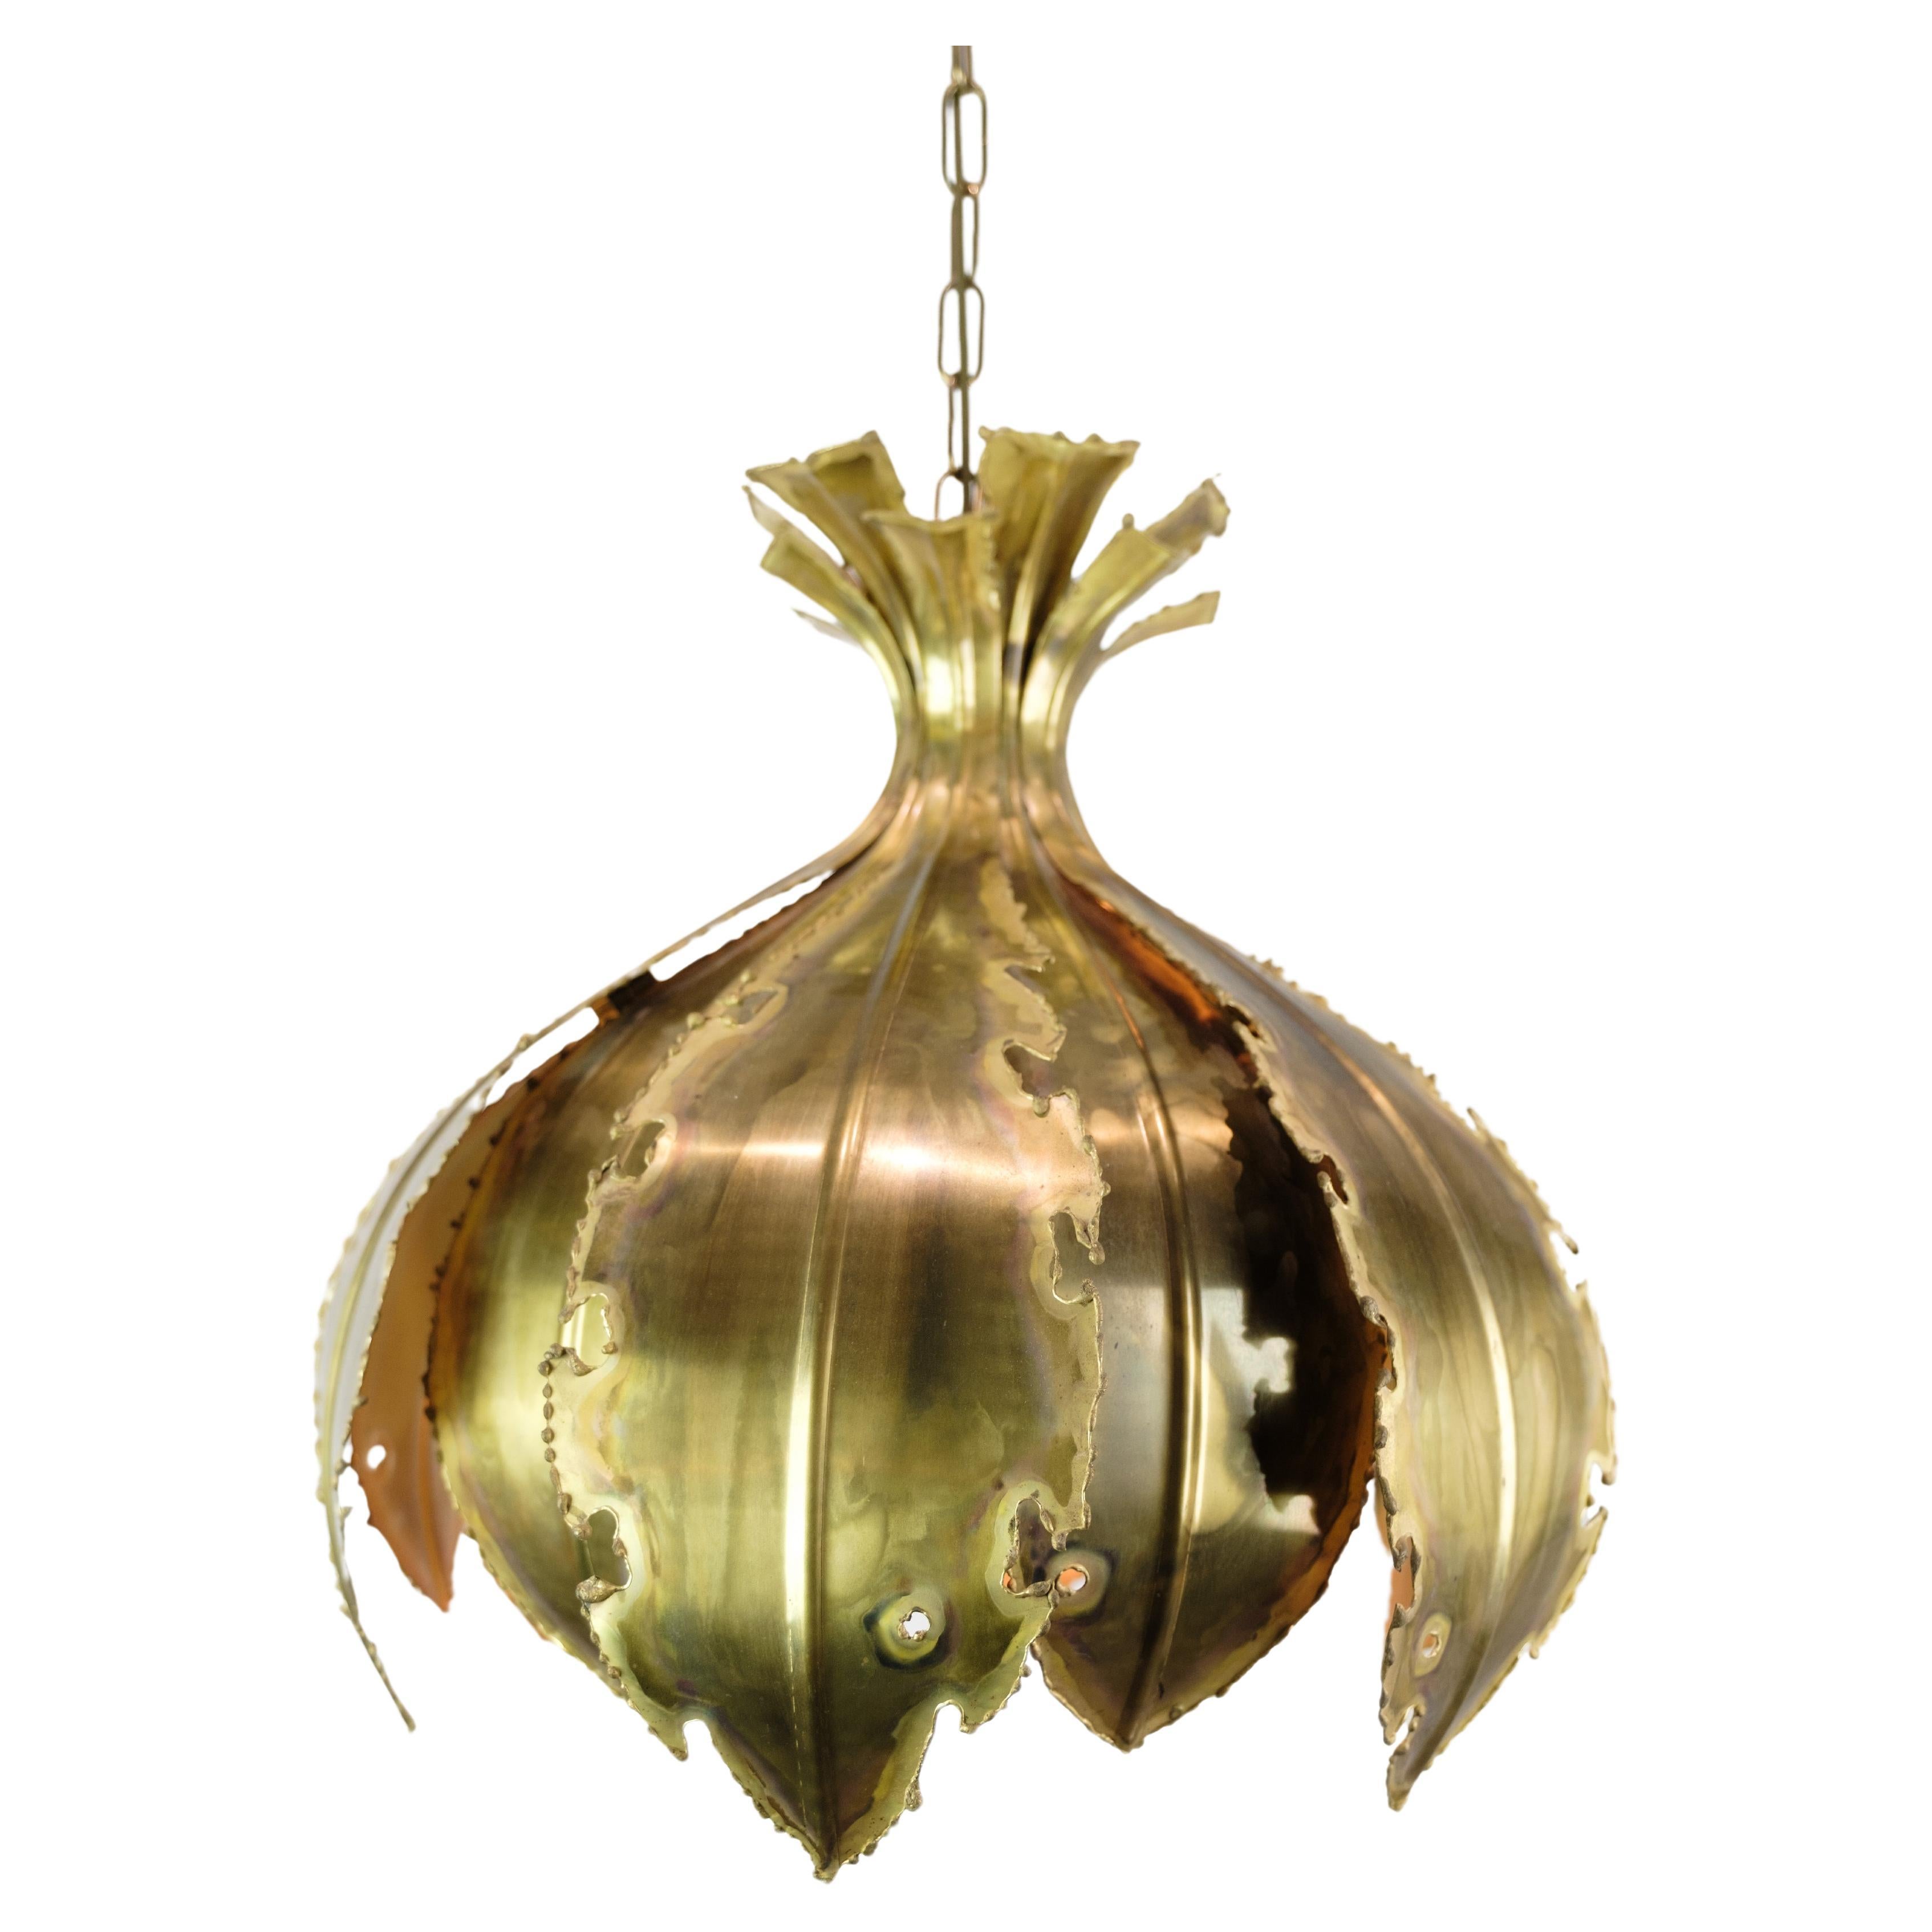 Ceiling lamp In Brass, Designed By Sven Aage Holm Sørensen From 1960s For Sale